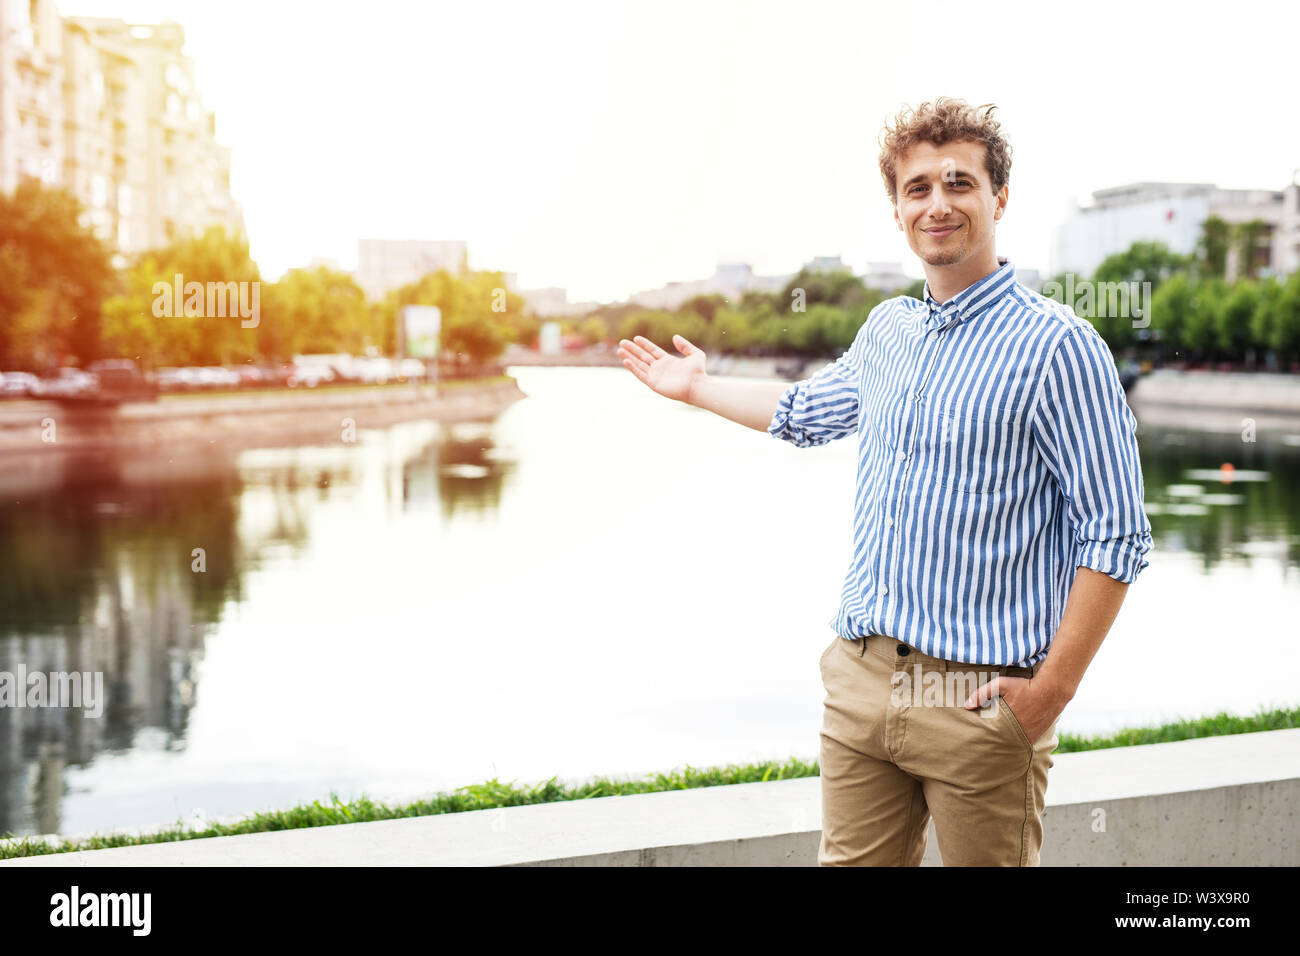 young man smart casual dressed looking with confidence to camera presenting a european city with a river behind Stock Photo